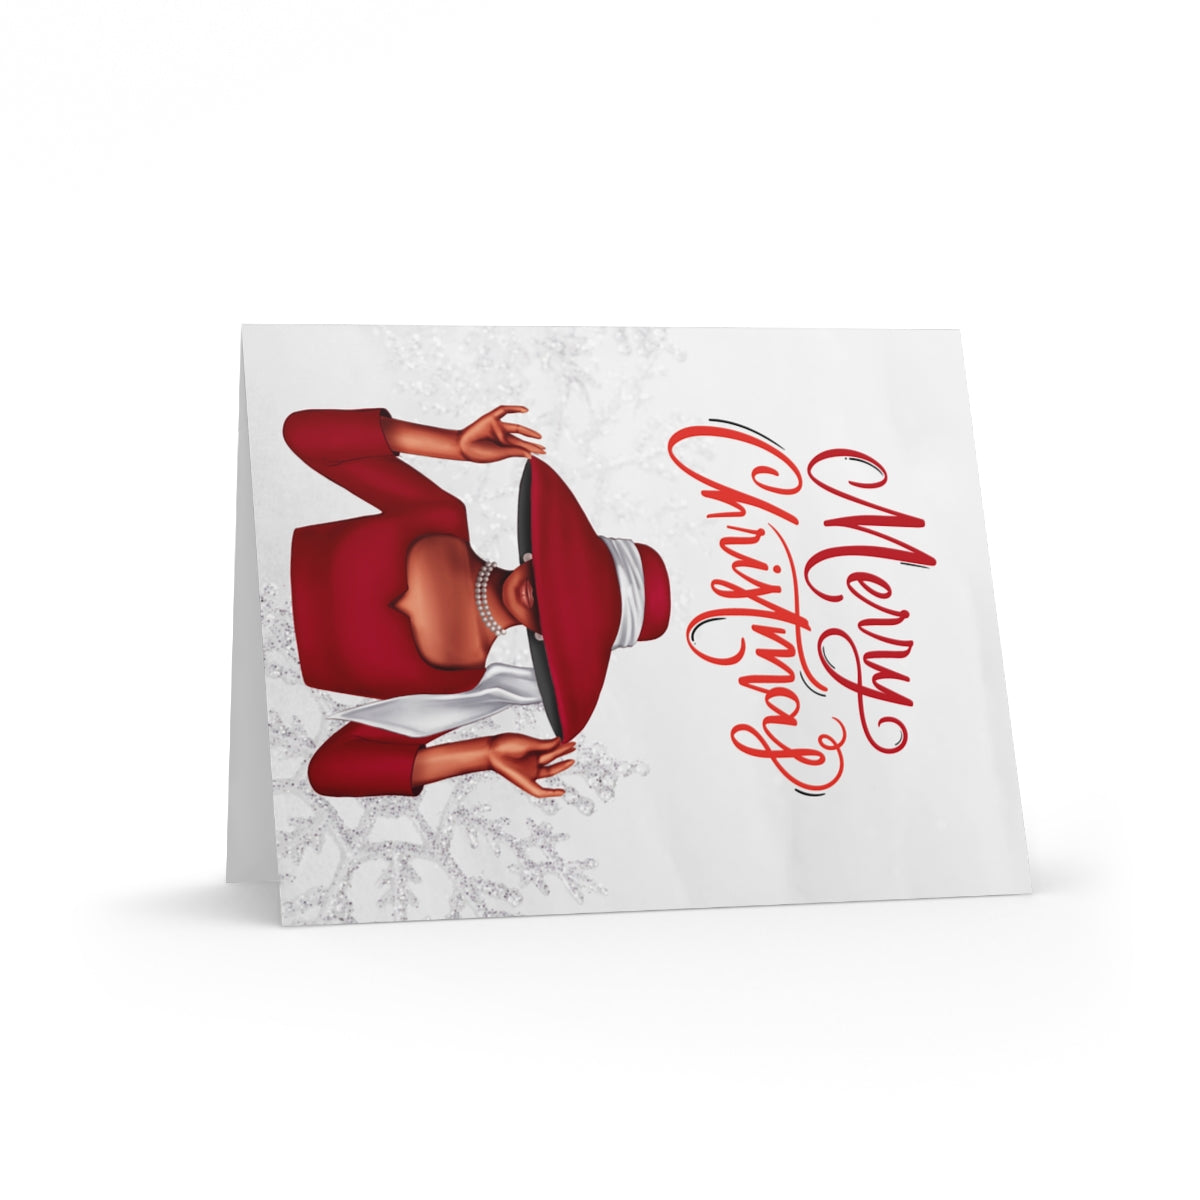 Merry Christmas Greeting cards| Postcards with Black Woman|